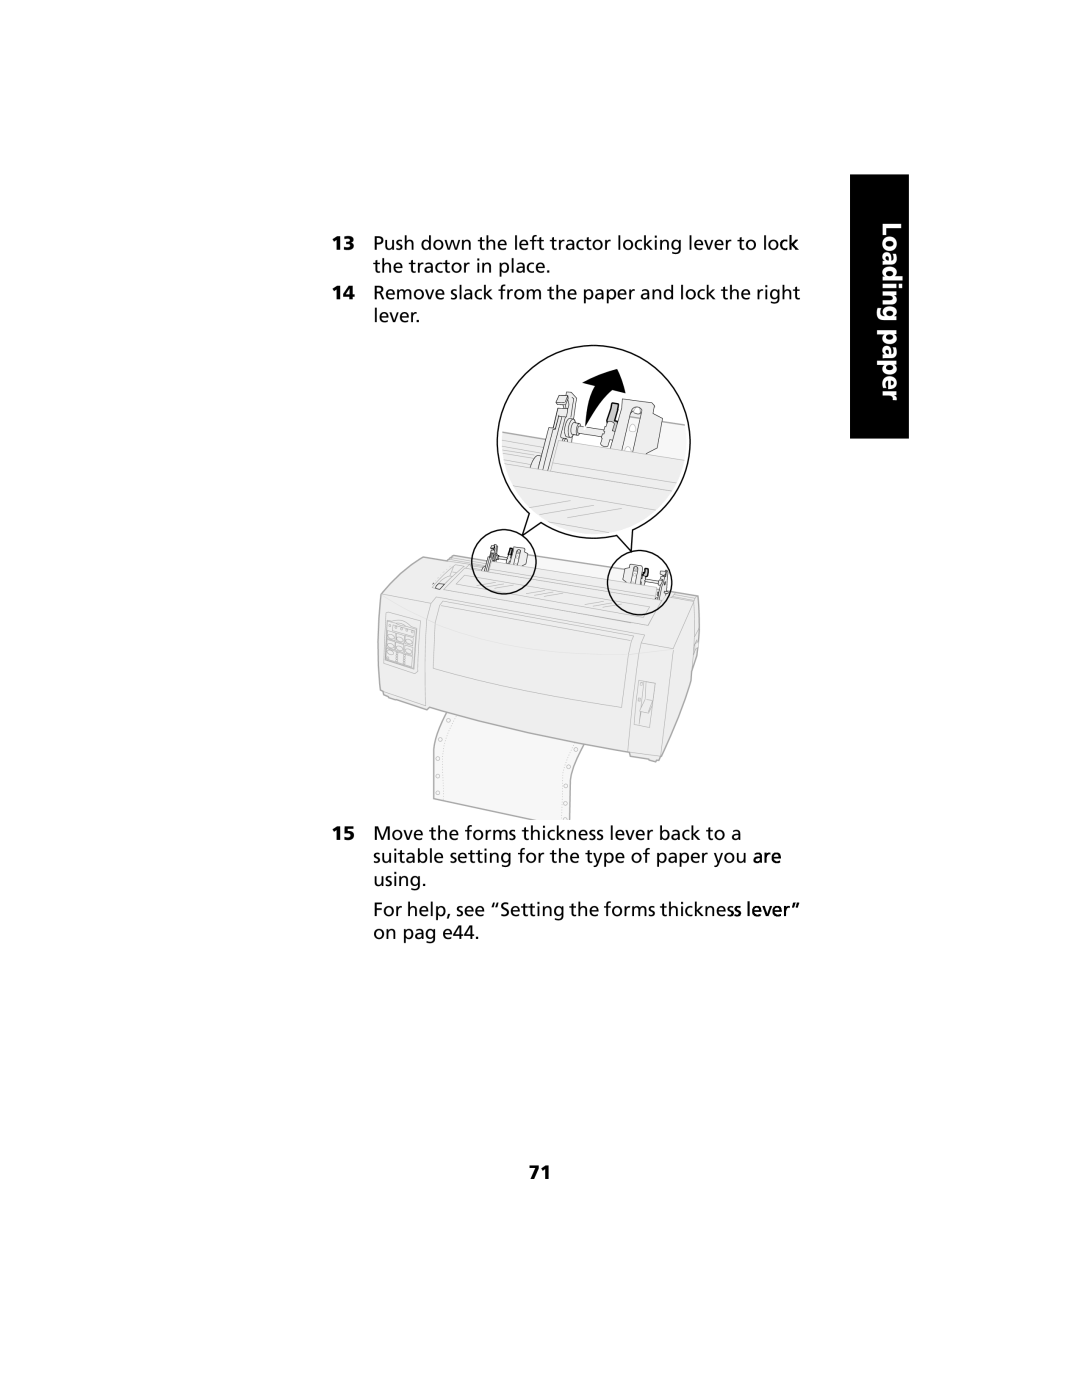 Lexmark 2480 manual Loading paper, Remove slack from the paper and lock the right lever 